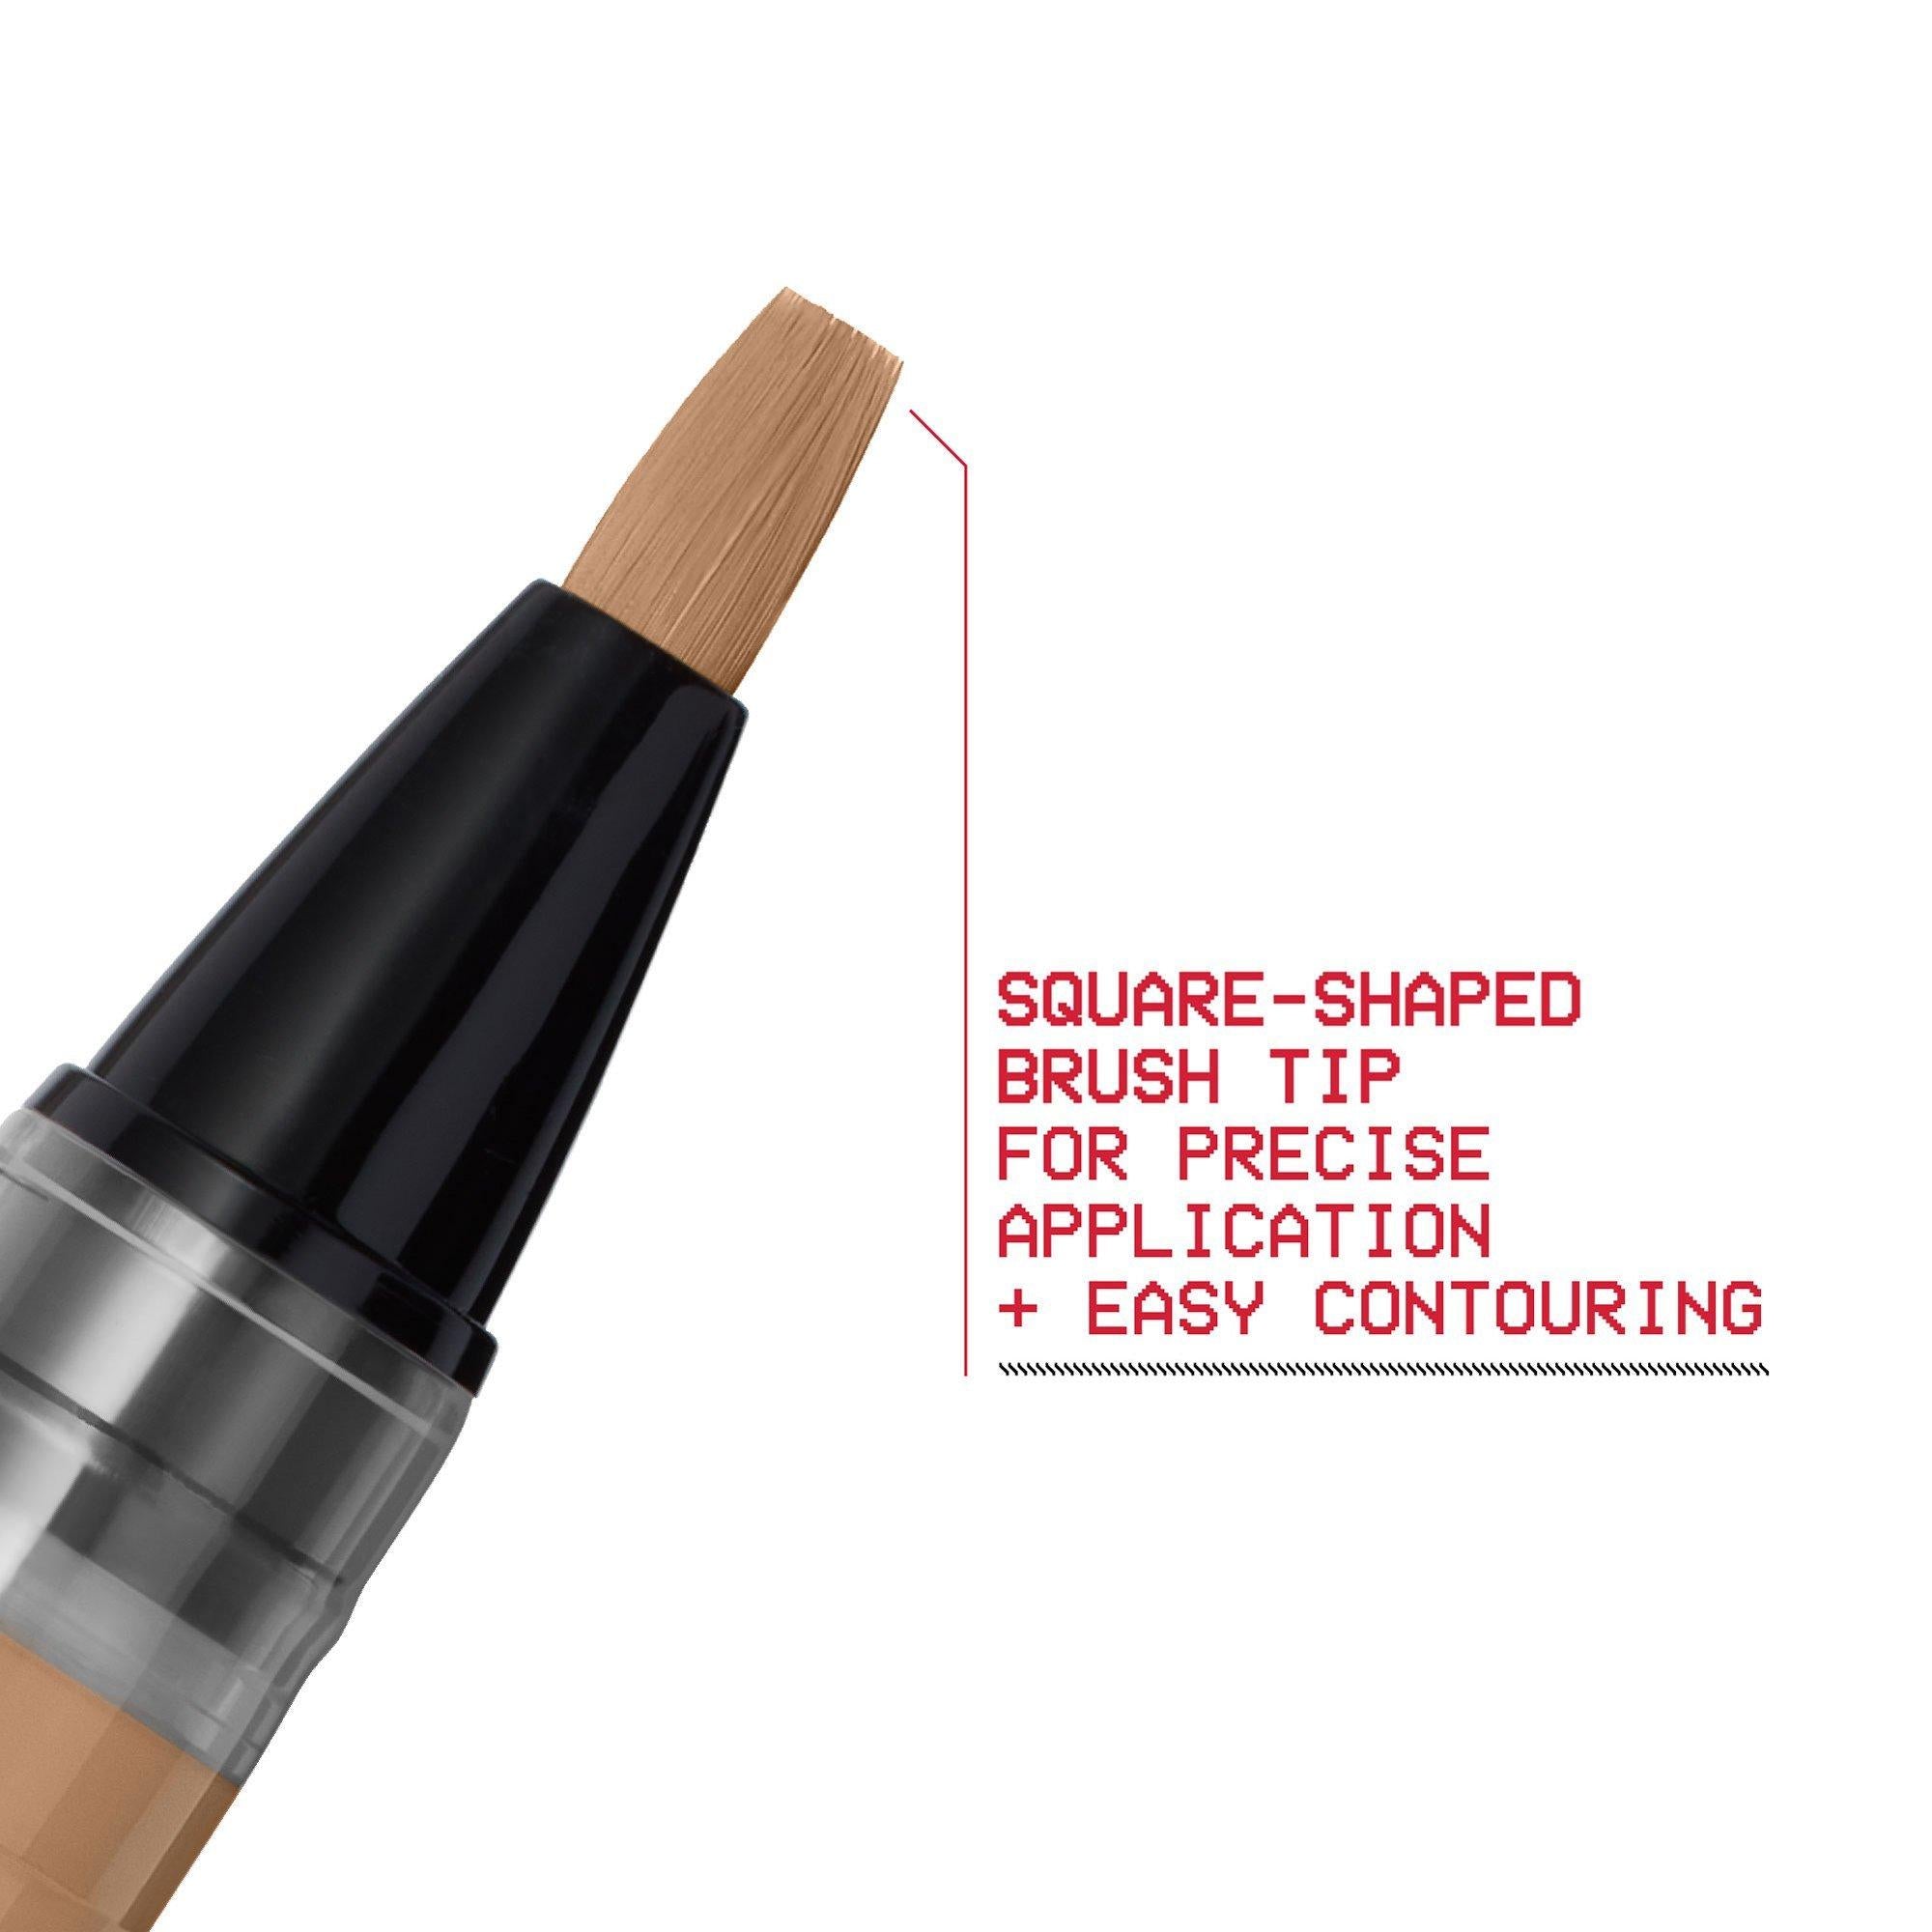 Smashbox Halo Healthy Glow 4-In-1 Perfecting Pen / F30-N